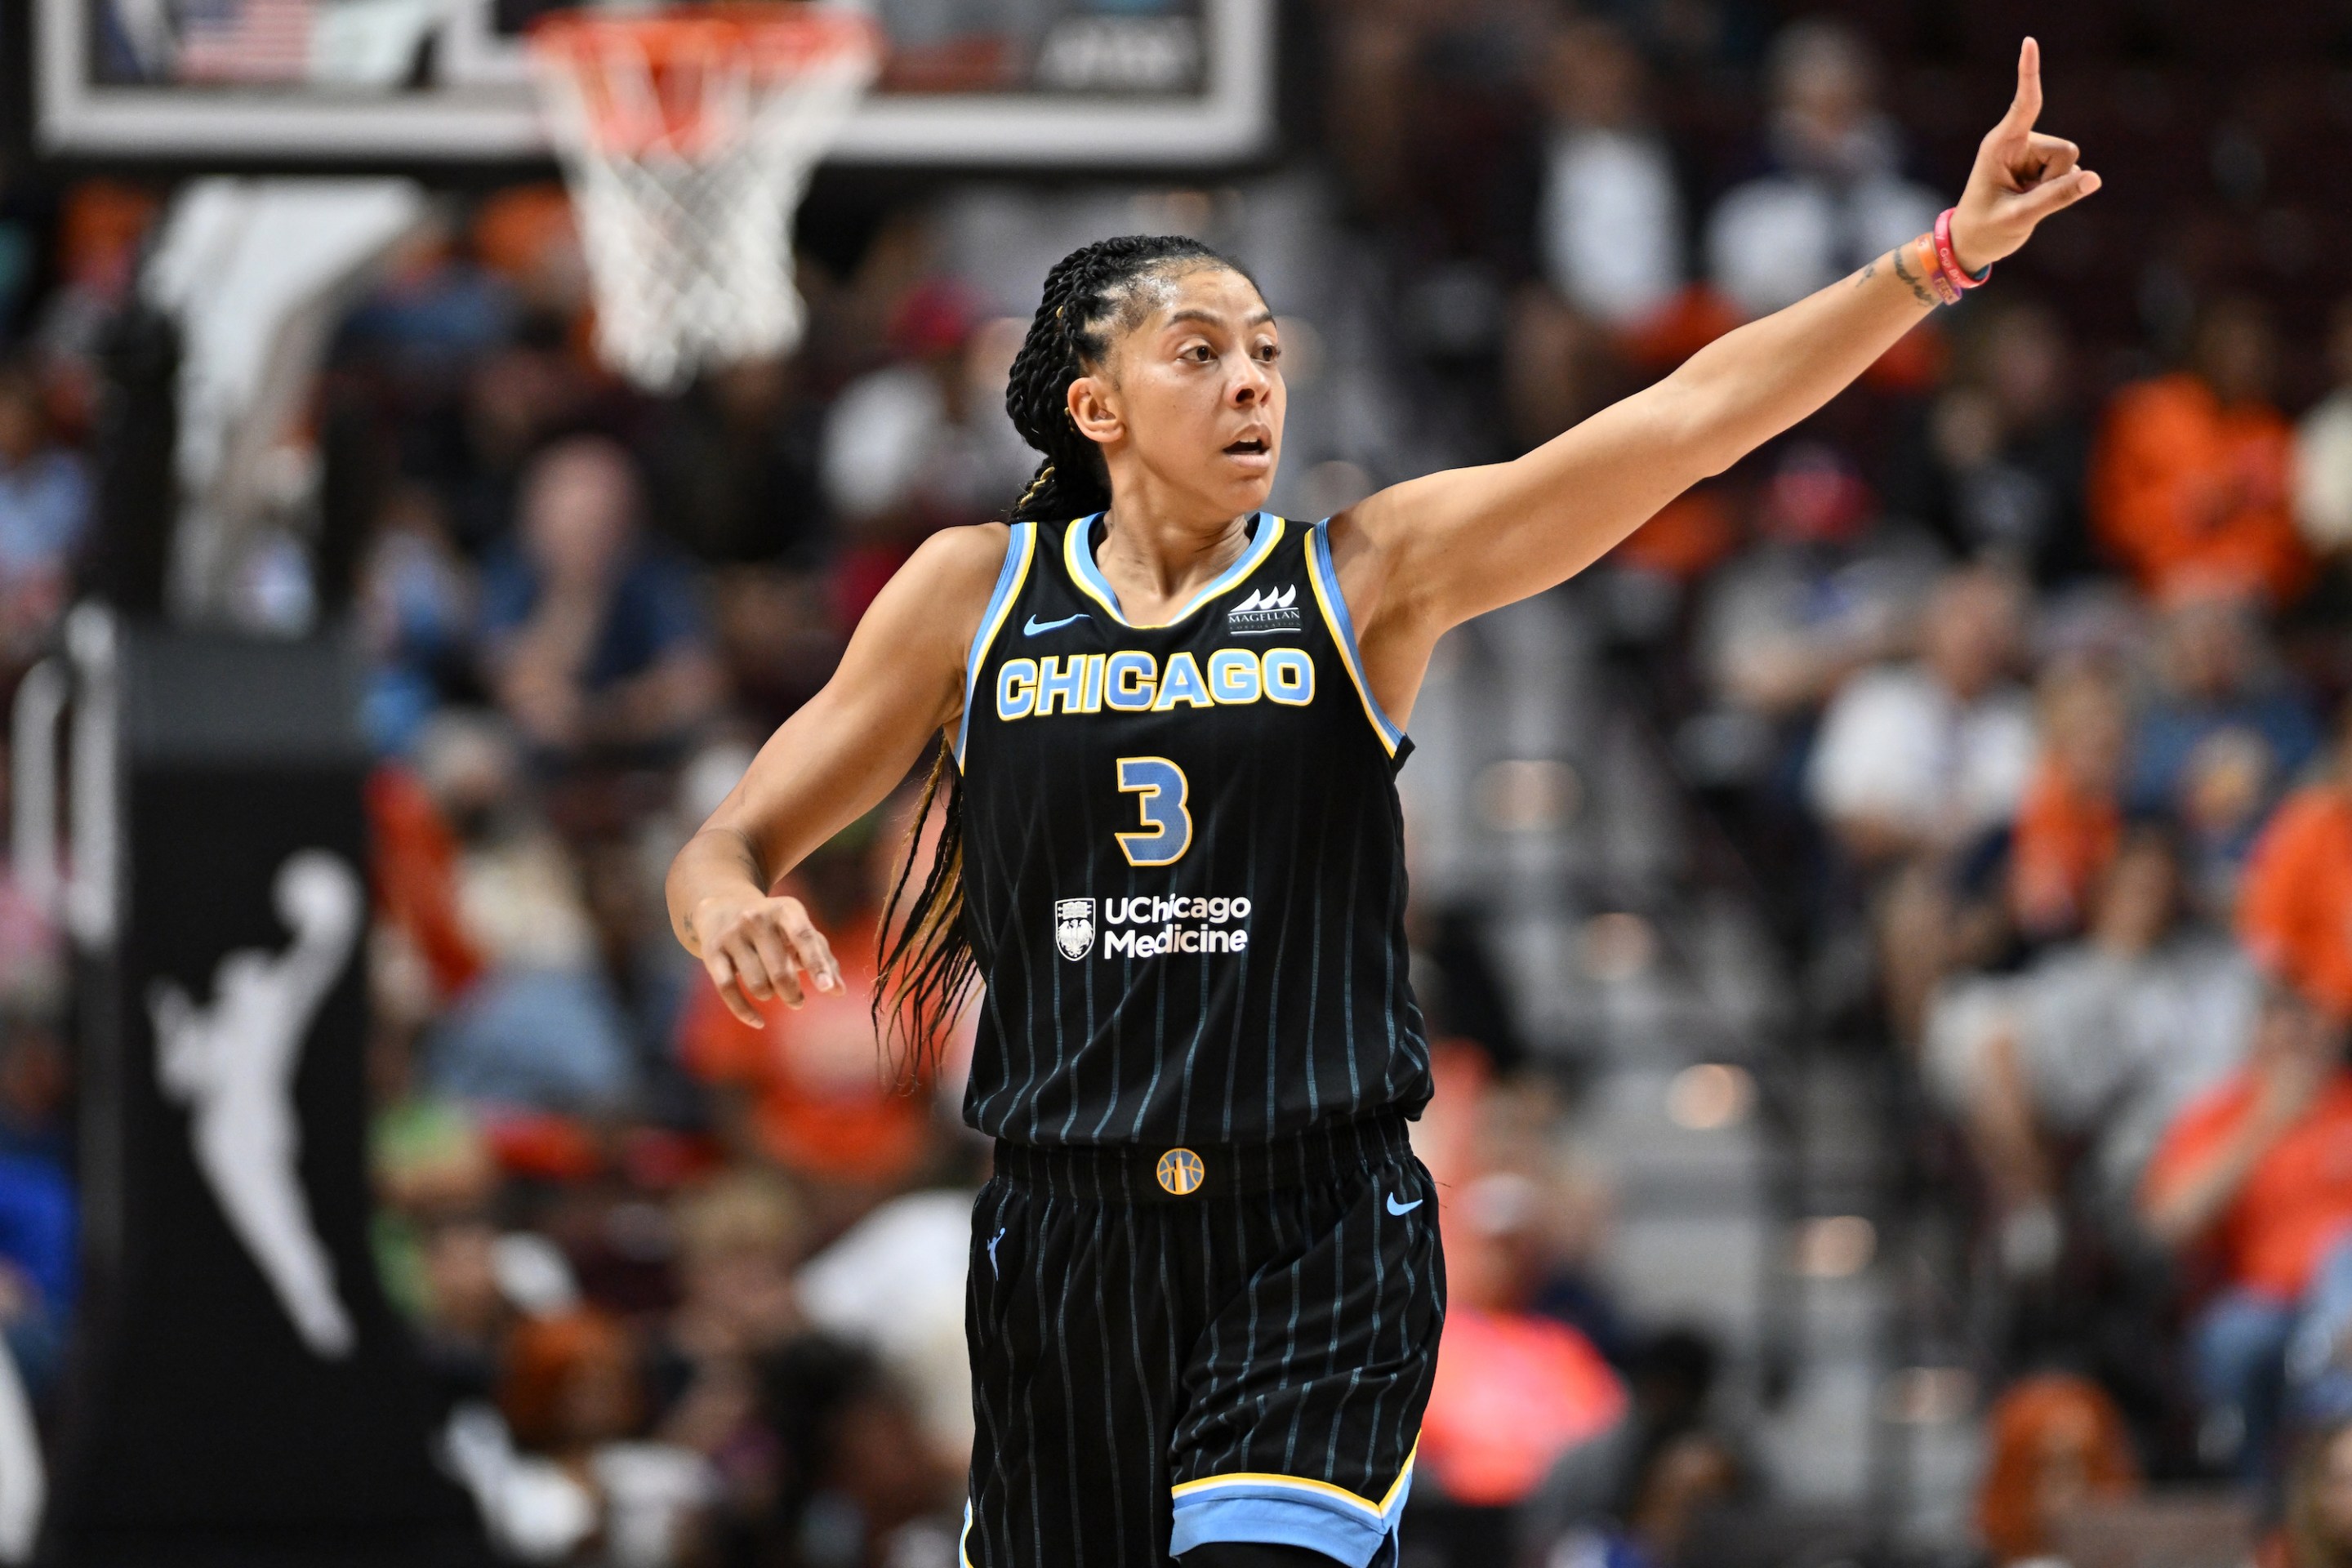 UNCASVILLE, CT - SEPTEMBER 6: Candace Parker #3 of the Chicago Sky looks on during the game against the Connecticut Sun during Round 2 Game 4 of the 2022 WNBA Playoffs on September 6, 2022 at Mohegan Sun Arena in Uncasville, Connecticut.